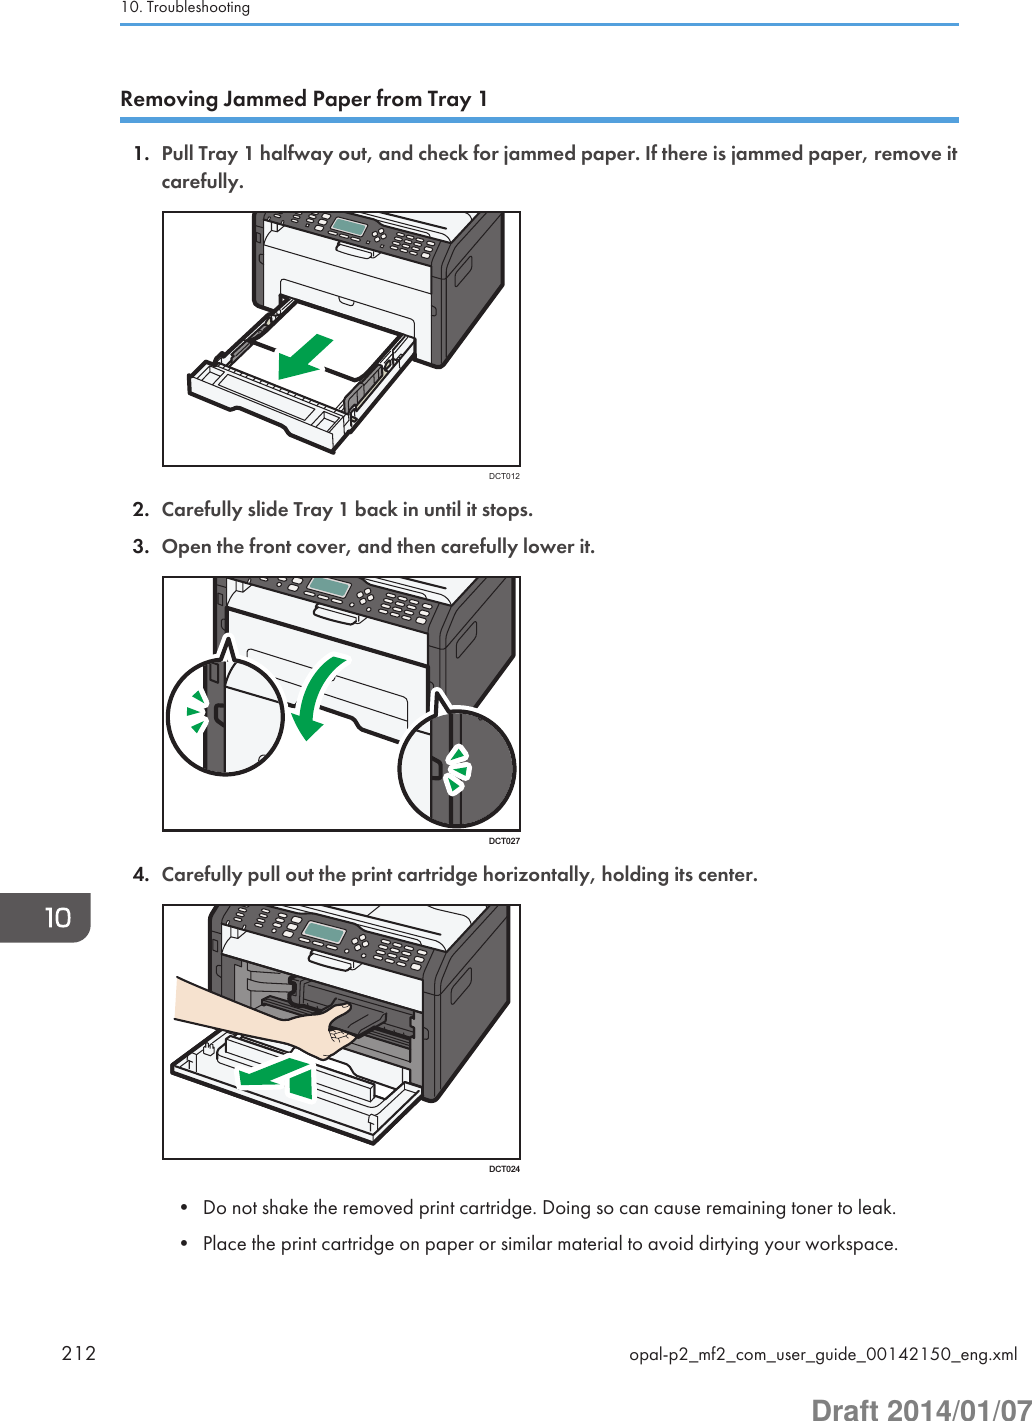 Removing Jammed Paper from Tray 11. Pull Tray 1 halfway out, and check for jammed paper. If there is jammed paper, remove itcarefully.DCT0122. Carefully slide Tray 1 back in until it stops.3. Open the front cover, and then carefully lower it.DCT0274. Carefully pull out the print cartridge horizontally, holding its center.DCT024• Do not shake the removed print cartridge. Doing so can cause remaining toner to leak.• Place the print cartridge on paper or similar material to avoid dirtying your workspace.10. Troubleshooting212 opal-p2_mf2_com_user_guide_00142150_eng.xmlDraft 2014/01/07